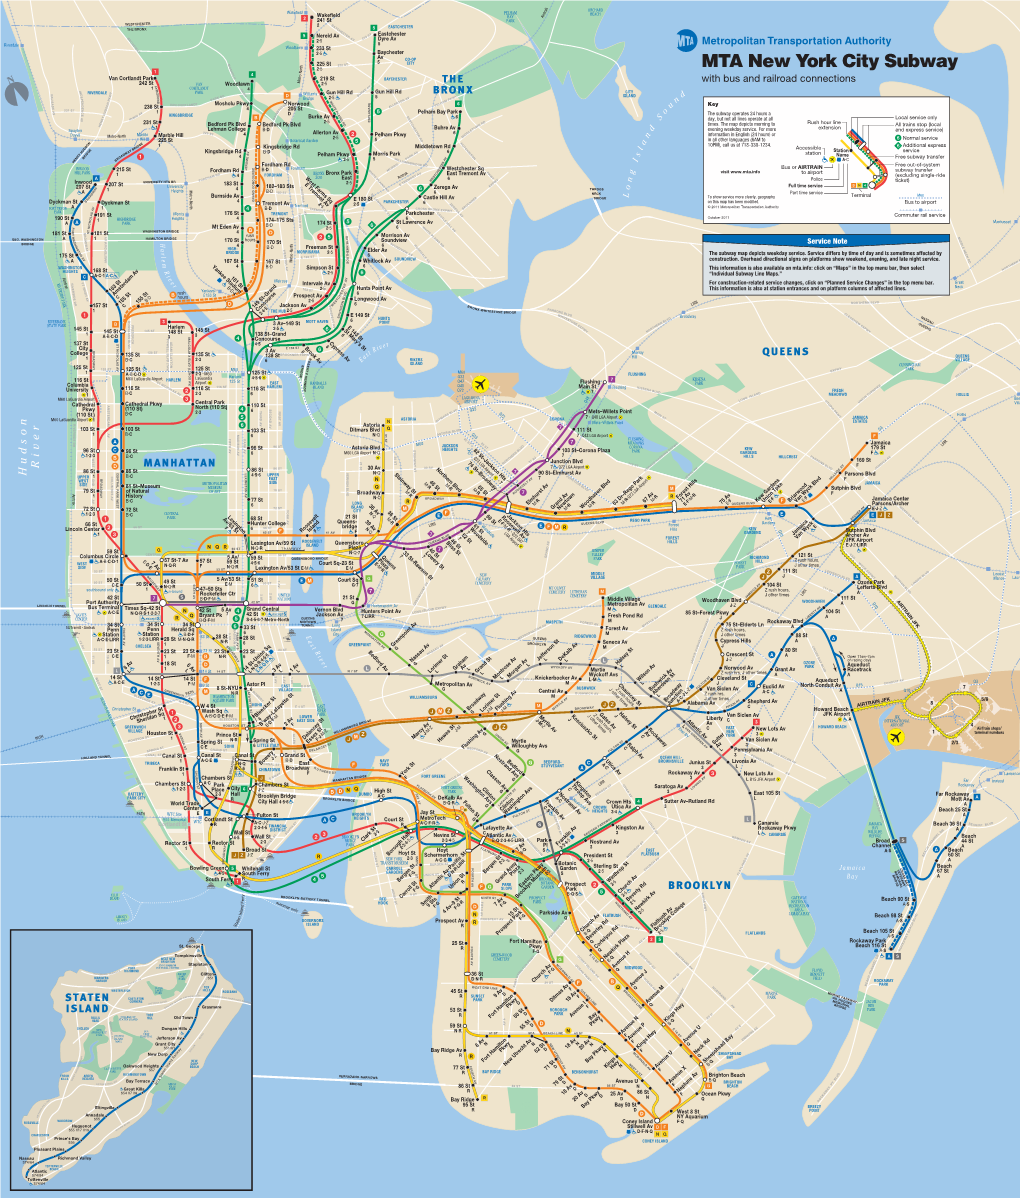 Subway Map Depicts Weekday Service